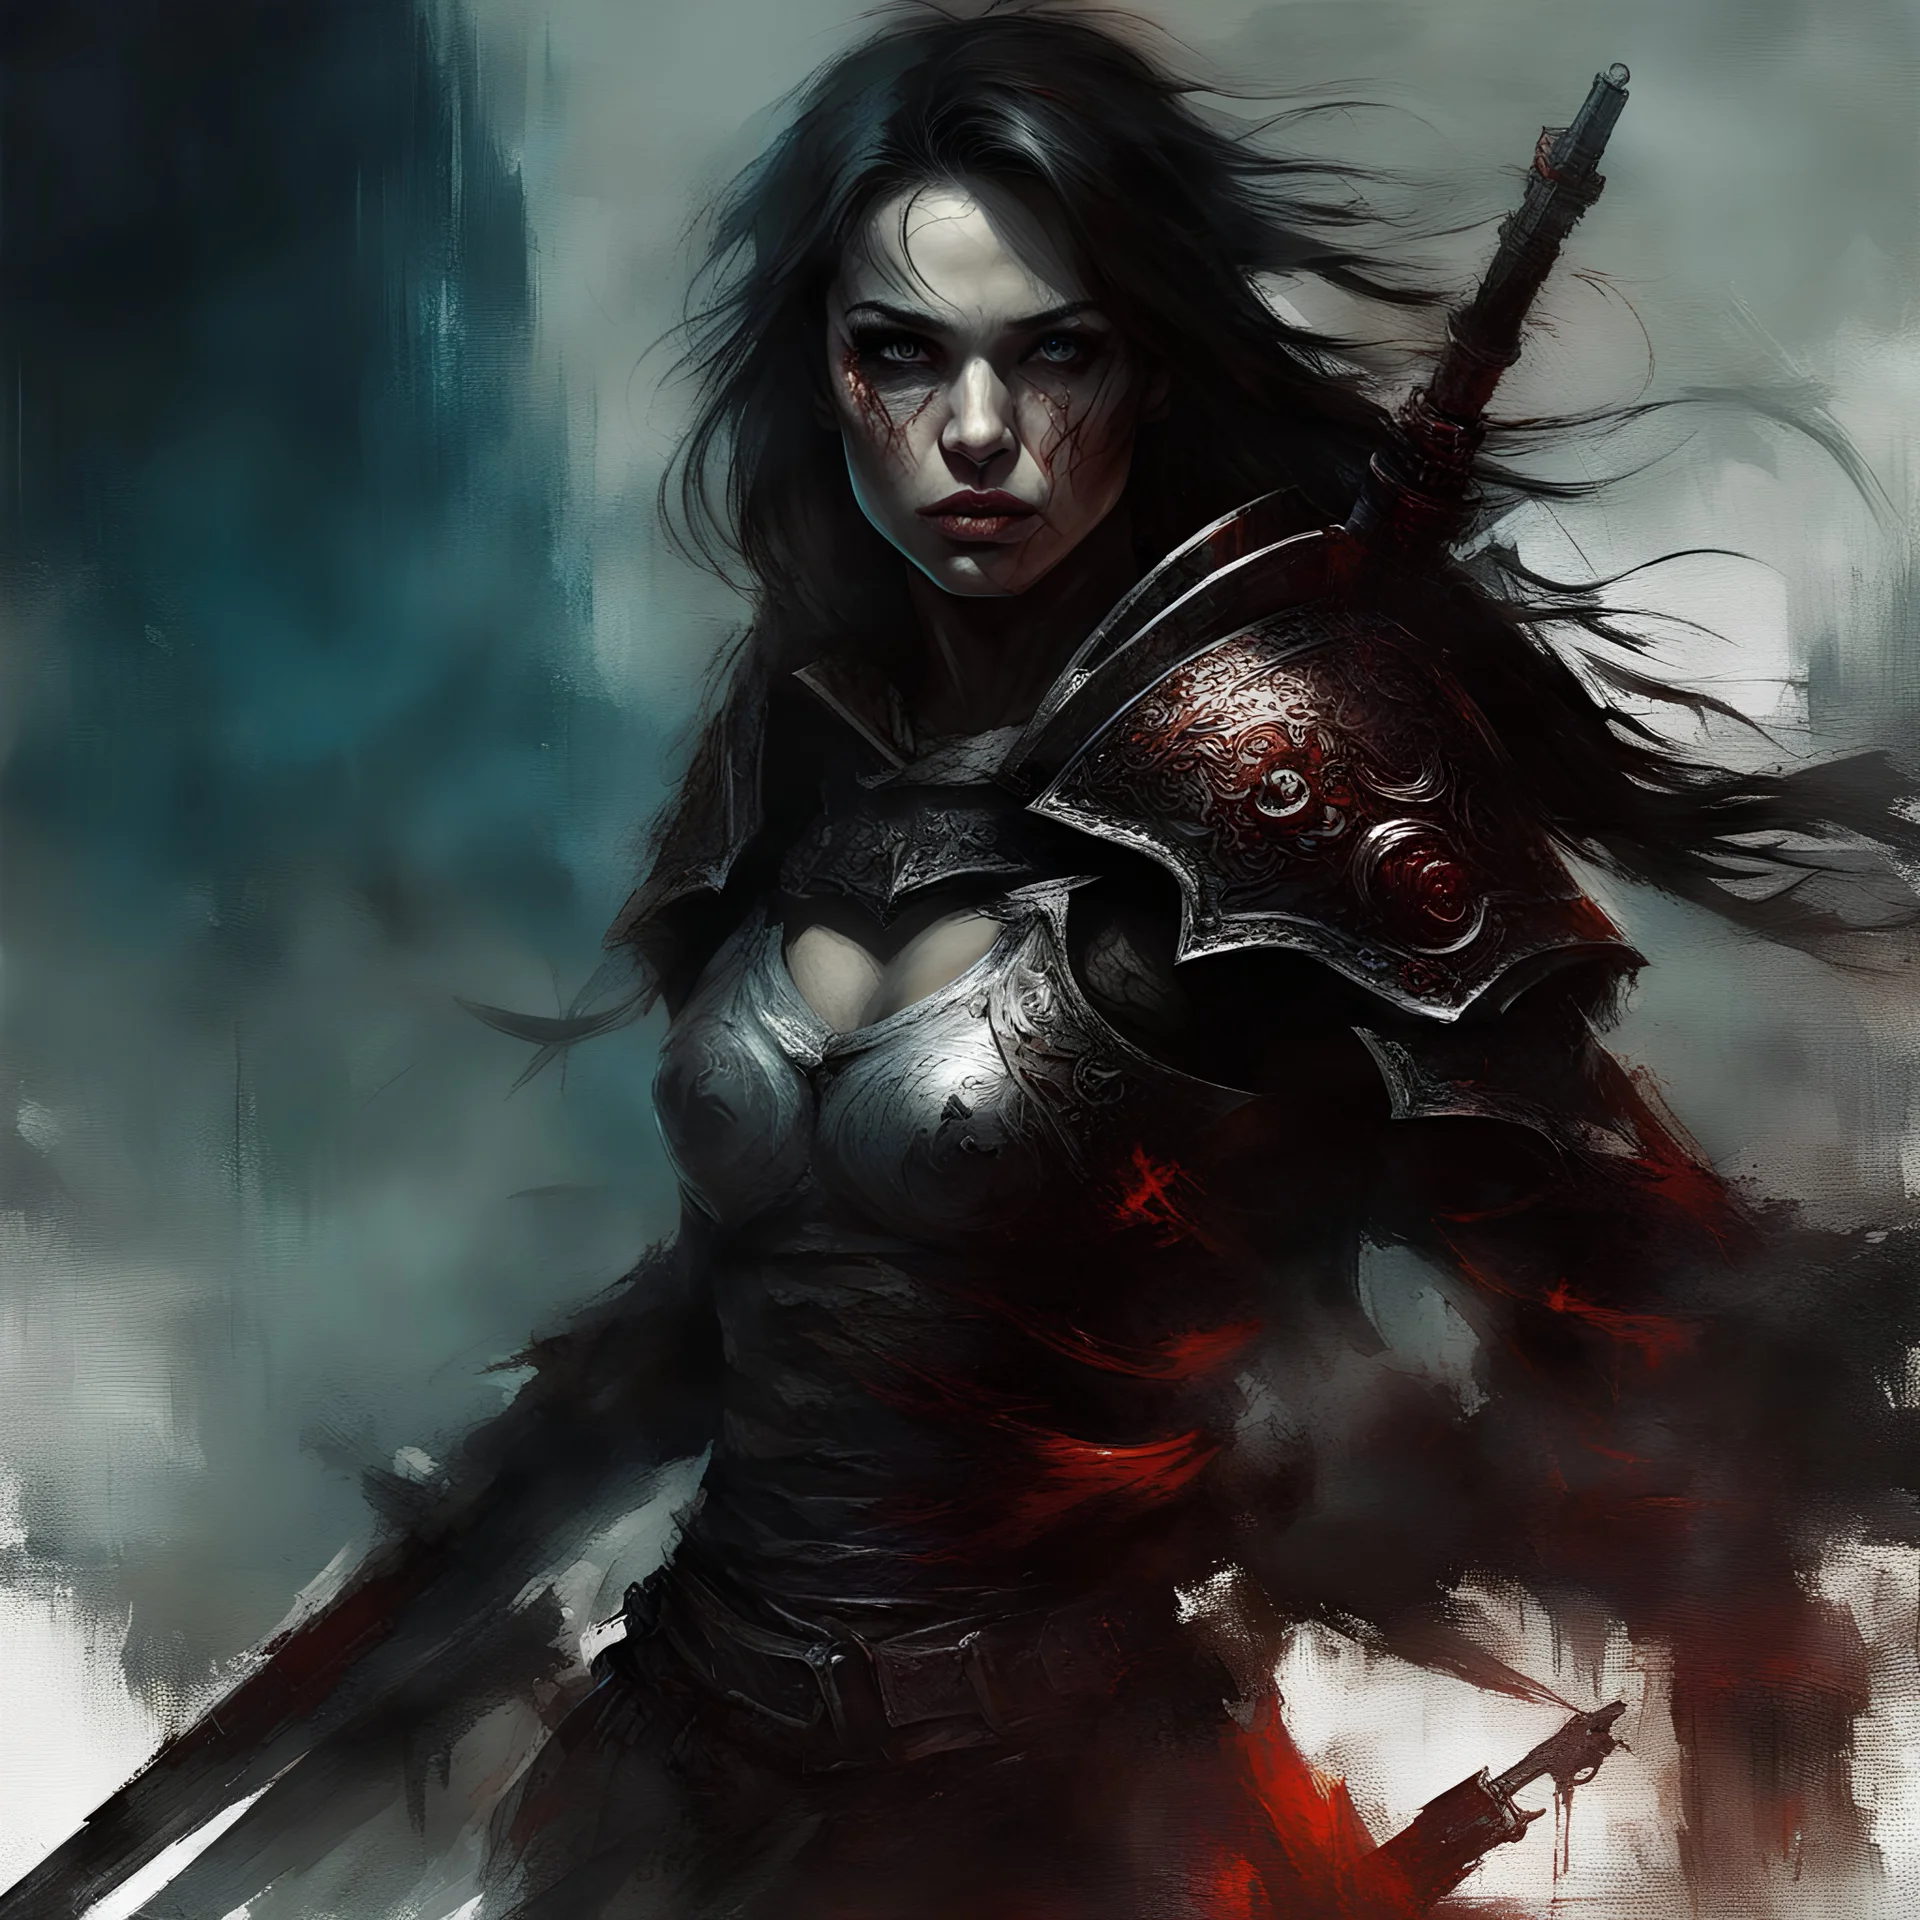 A harsh warrior girl against the background of a great battle, horror and fear, death and suffering, cold colors, oil, Raymond Swanland